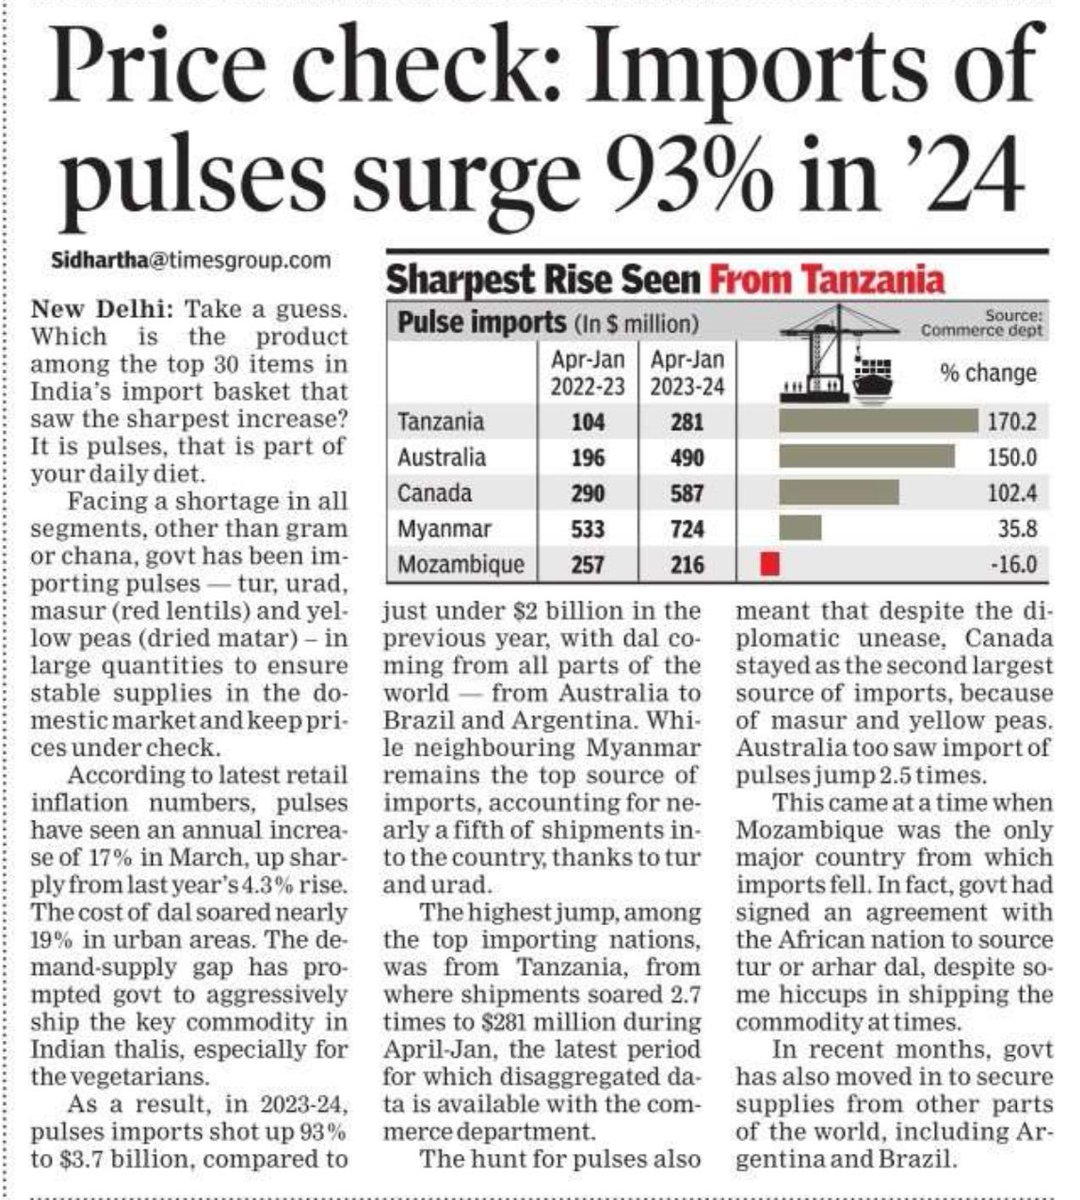 We will import pulses, but we will not assure MSP to farmers, we will will not give legal sanctity to Minimum Support Price, the same MSP, which Govt announces 2 times a year. Legal sanctity to MSP, will surely, encourage farmers to sow pulses, make us self sufficient @PMOIndia.